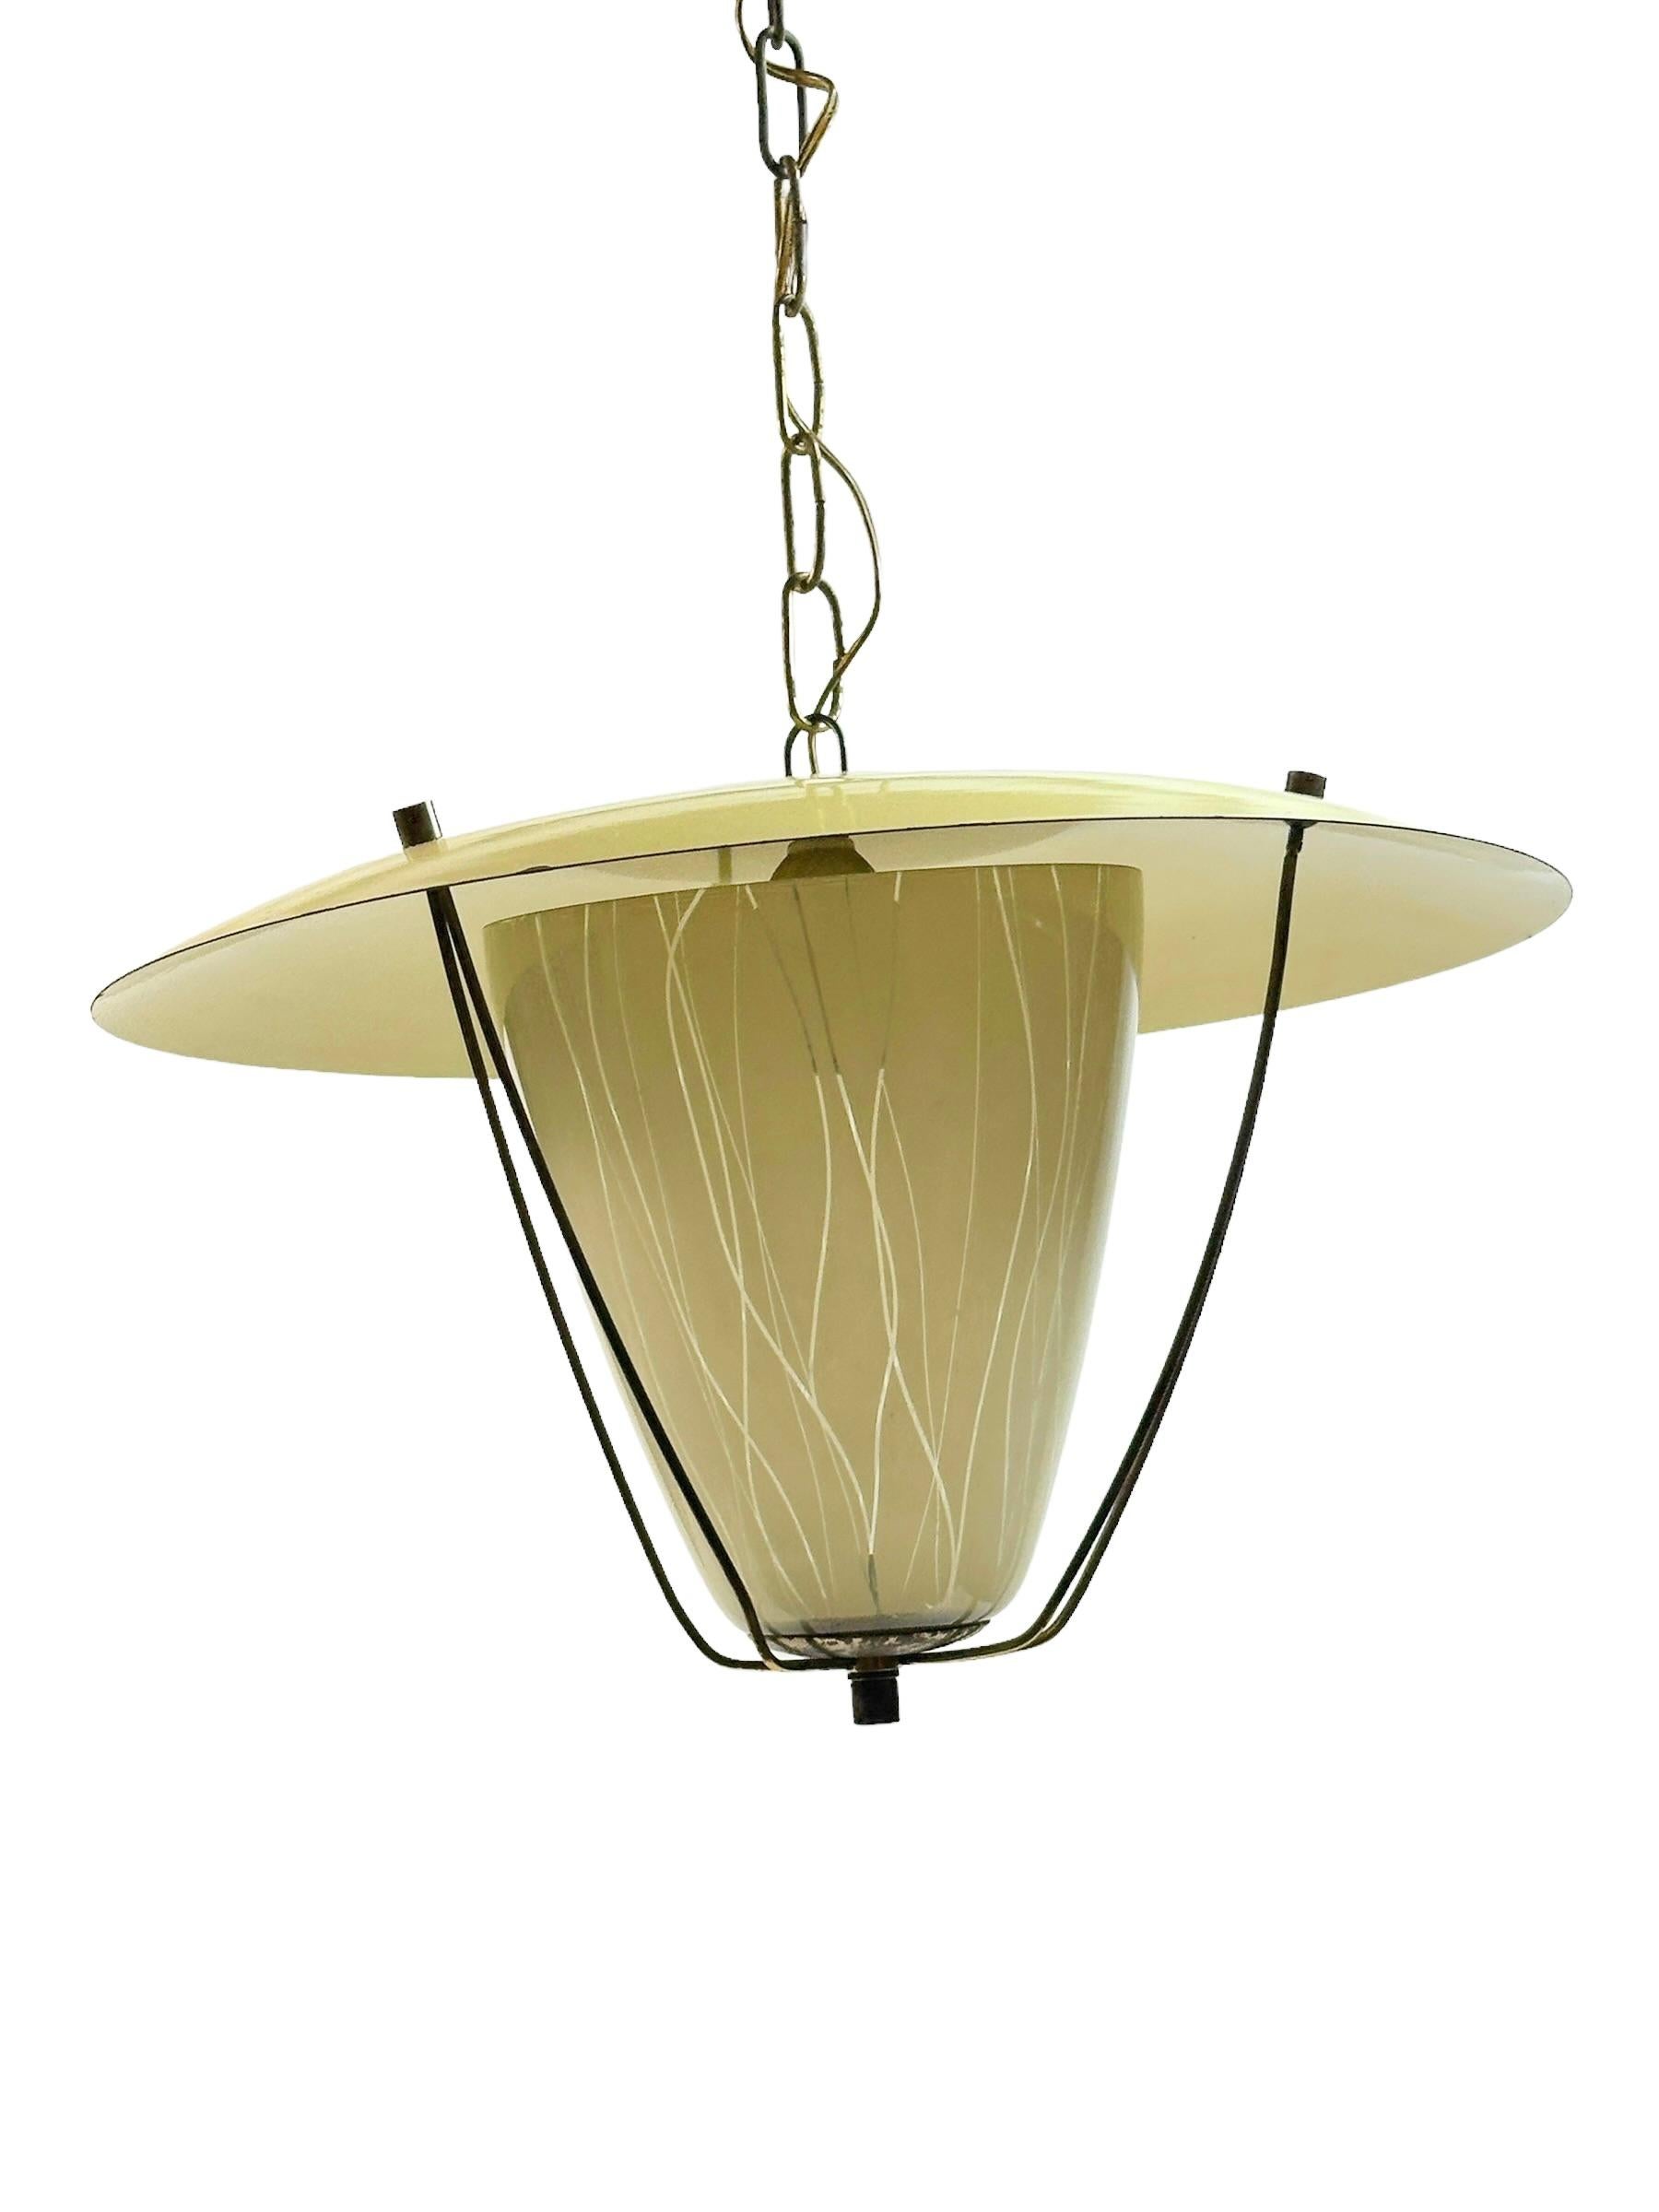 Lacquered Beautiful Stilnovo Lantern Pendant Chandelier Vintage Italy, 1950s For Sale